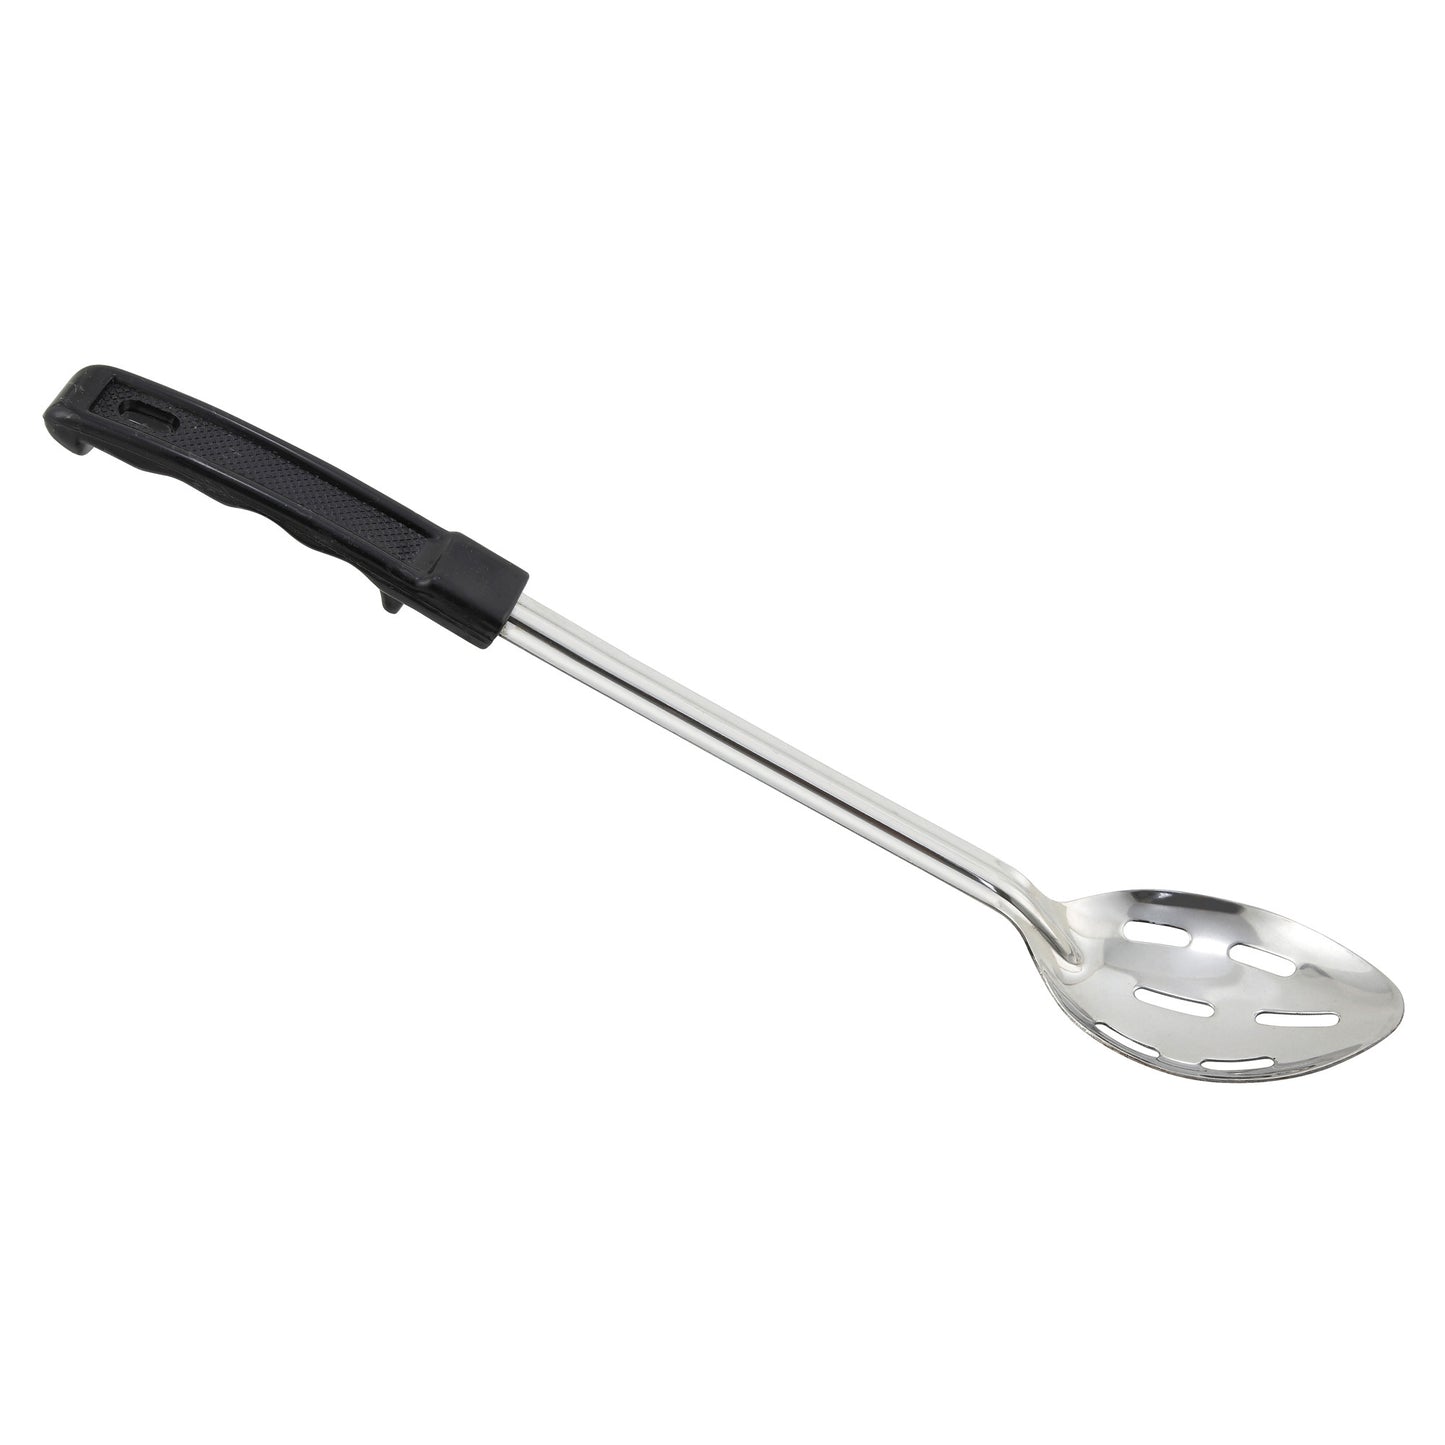 BHSN-15 - Winco Prime Basting Spoon with Stop-Hook ABS Handle - Slotted, 15"